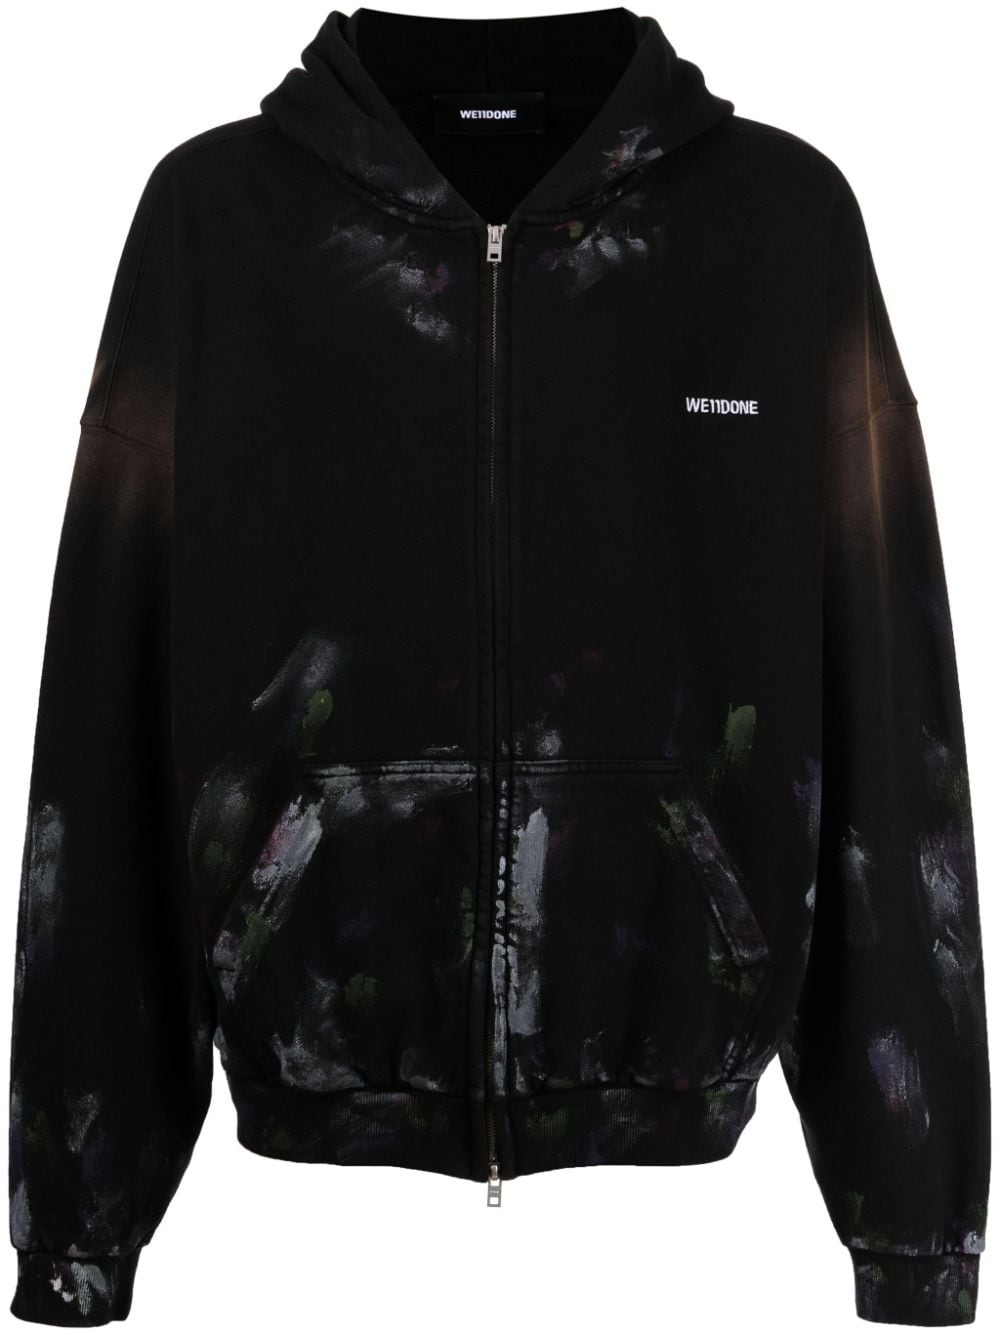 WE11 DONE PAINTERLY-PRINT COTTON HOODED JACKET